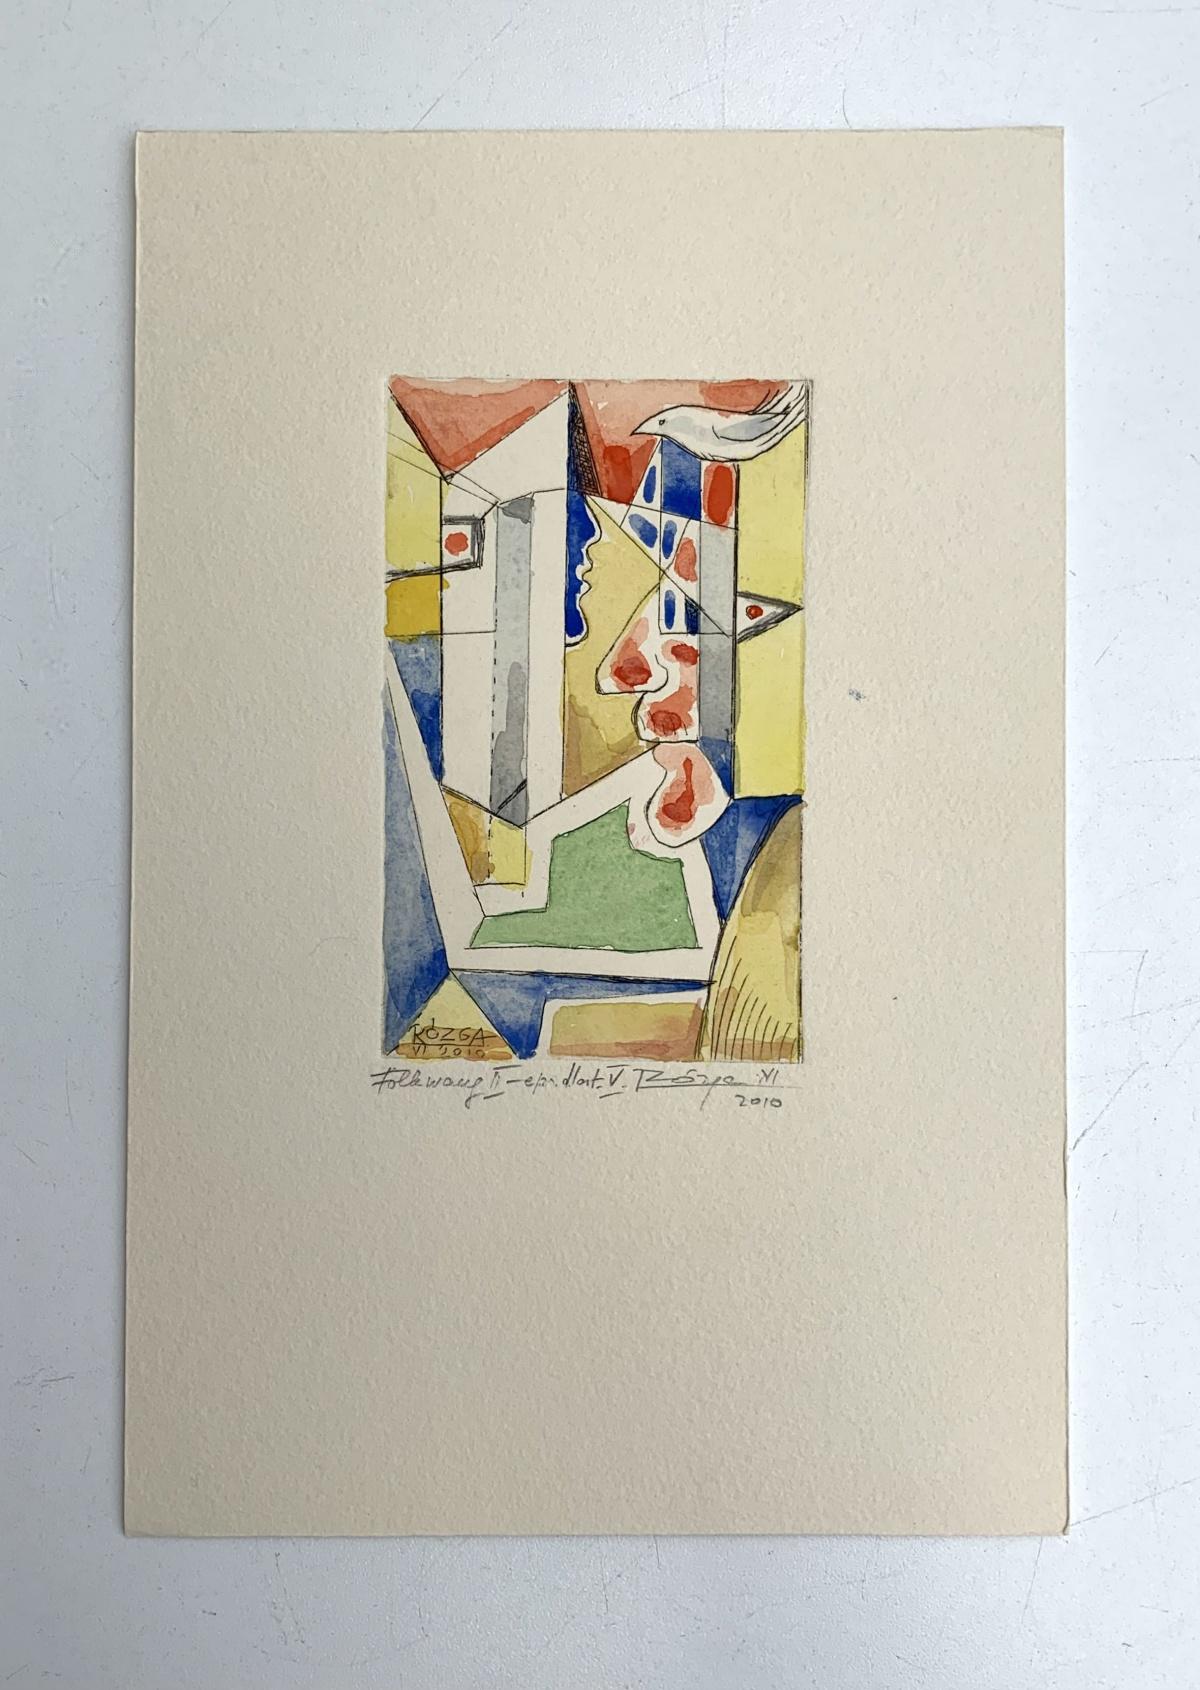 Folkwang -  Abstract drypoint & watercolor, Colorful, Surrealist, Vibrant - Contemporary Print by Leszek Rózga